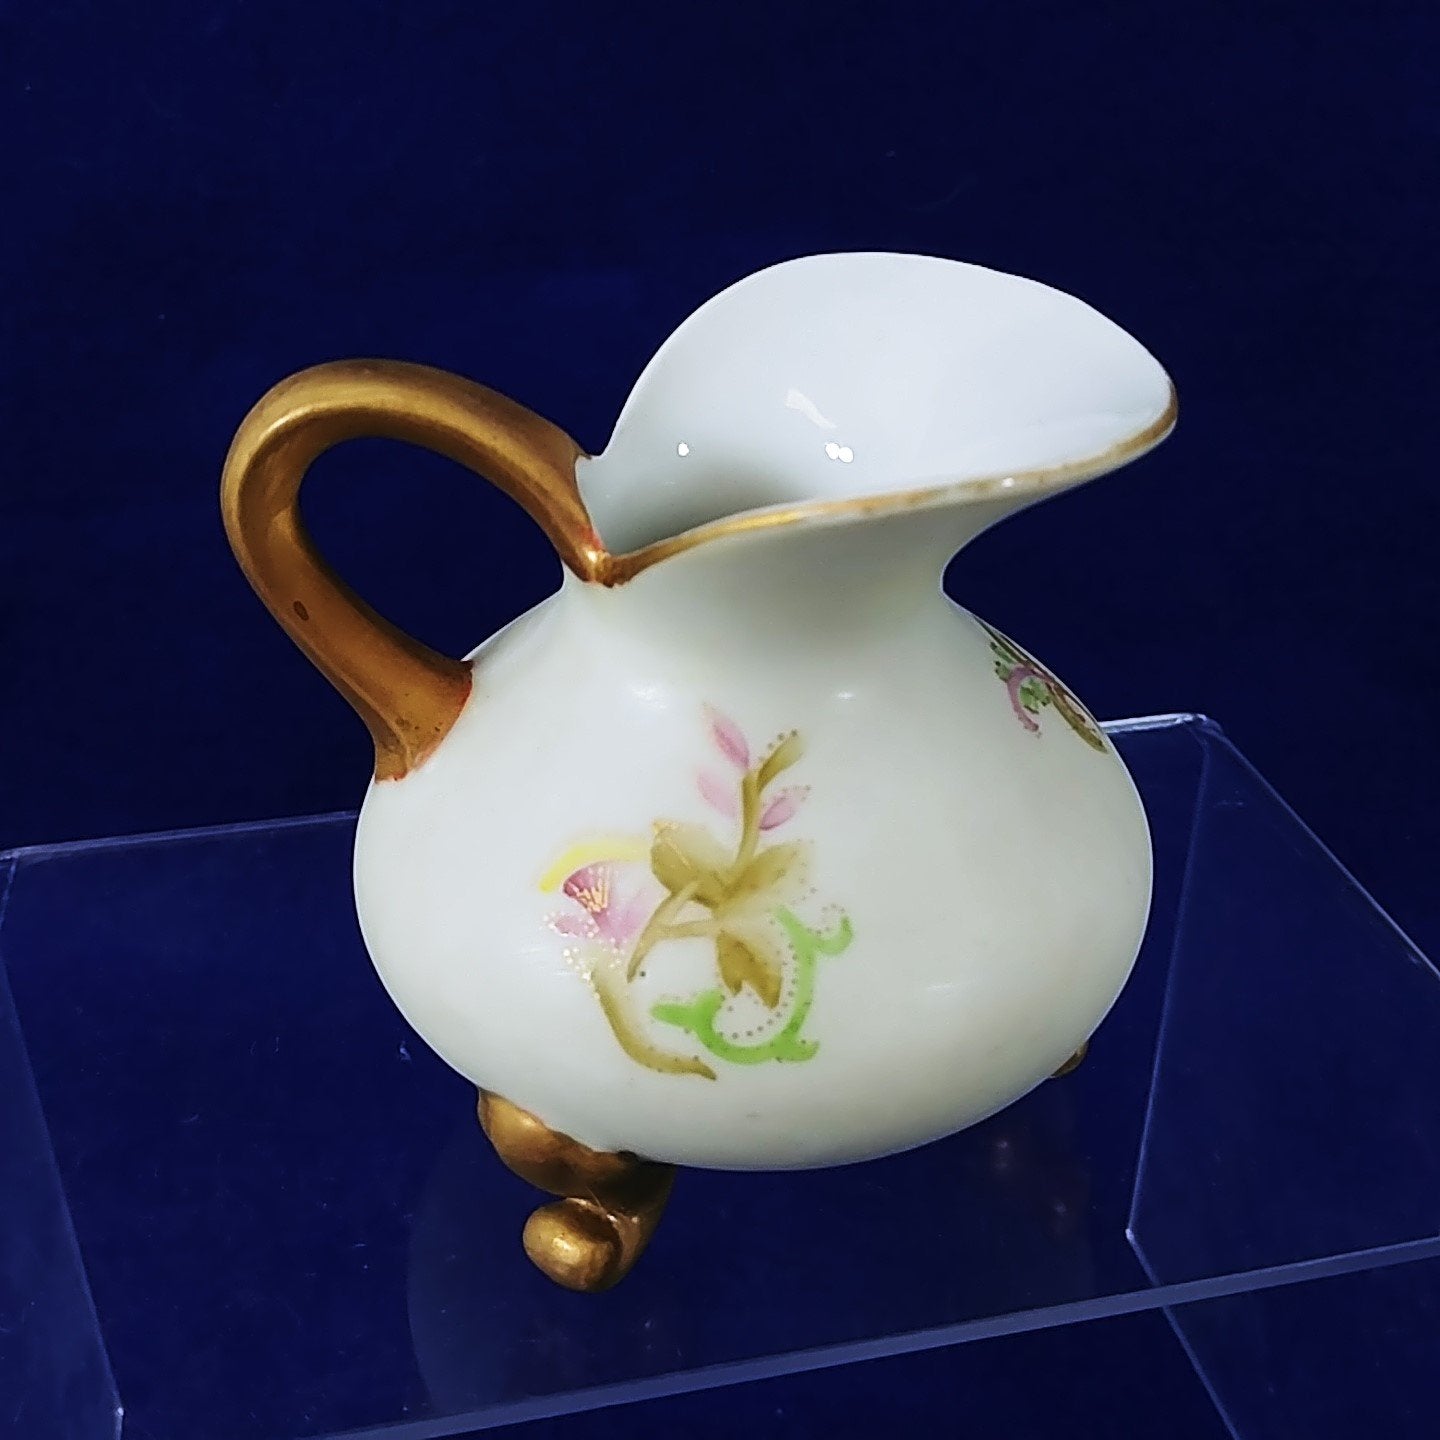 Creamer Pitcher Footed Hand Painted Gold Trim Floral Collectible Vintage